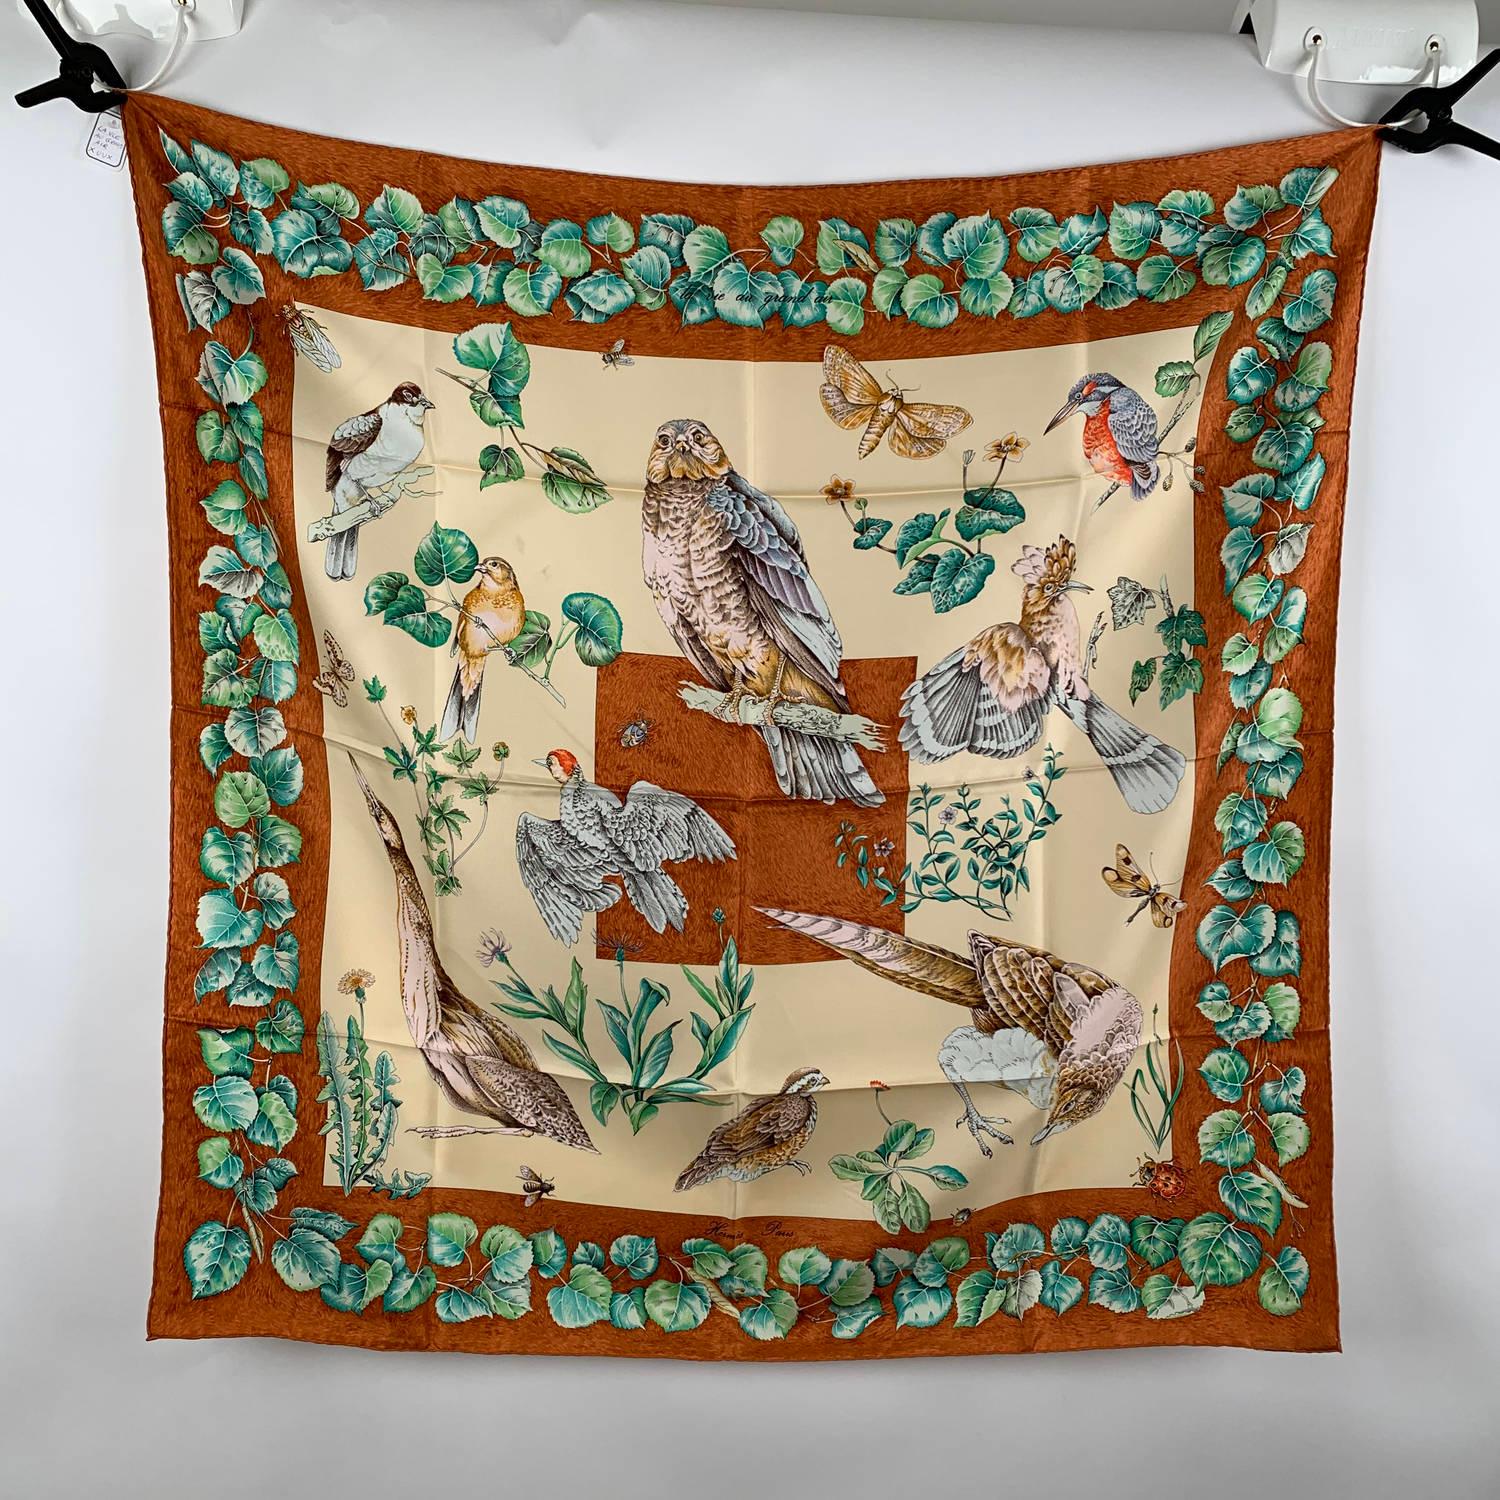 Beautiful Hermes 'La Vie En Grand Air' (Life In the Great Outdoors) silk scarf designed by Antoine De Jacquelot and originally issued in 1990. It has re-issued many times, in different colours, formats and variations of. It depicts wild birds